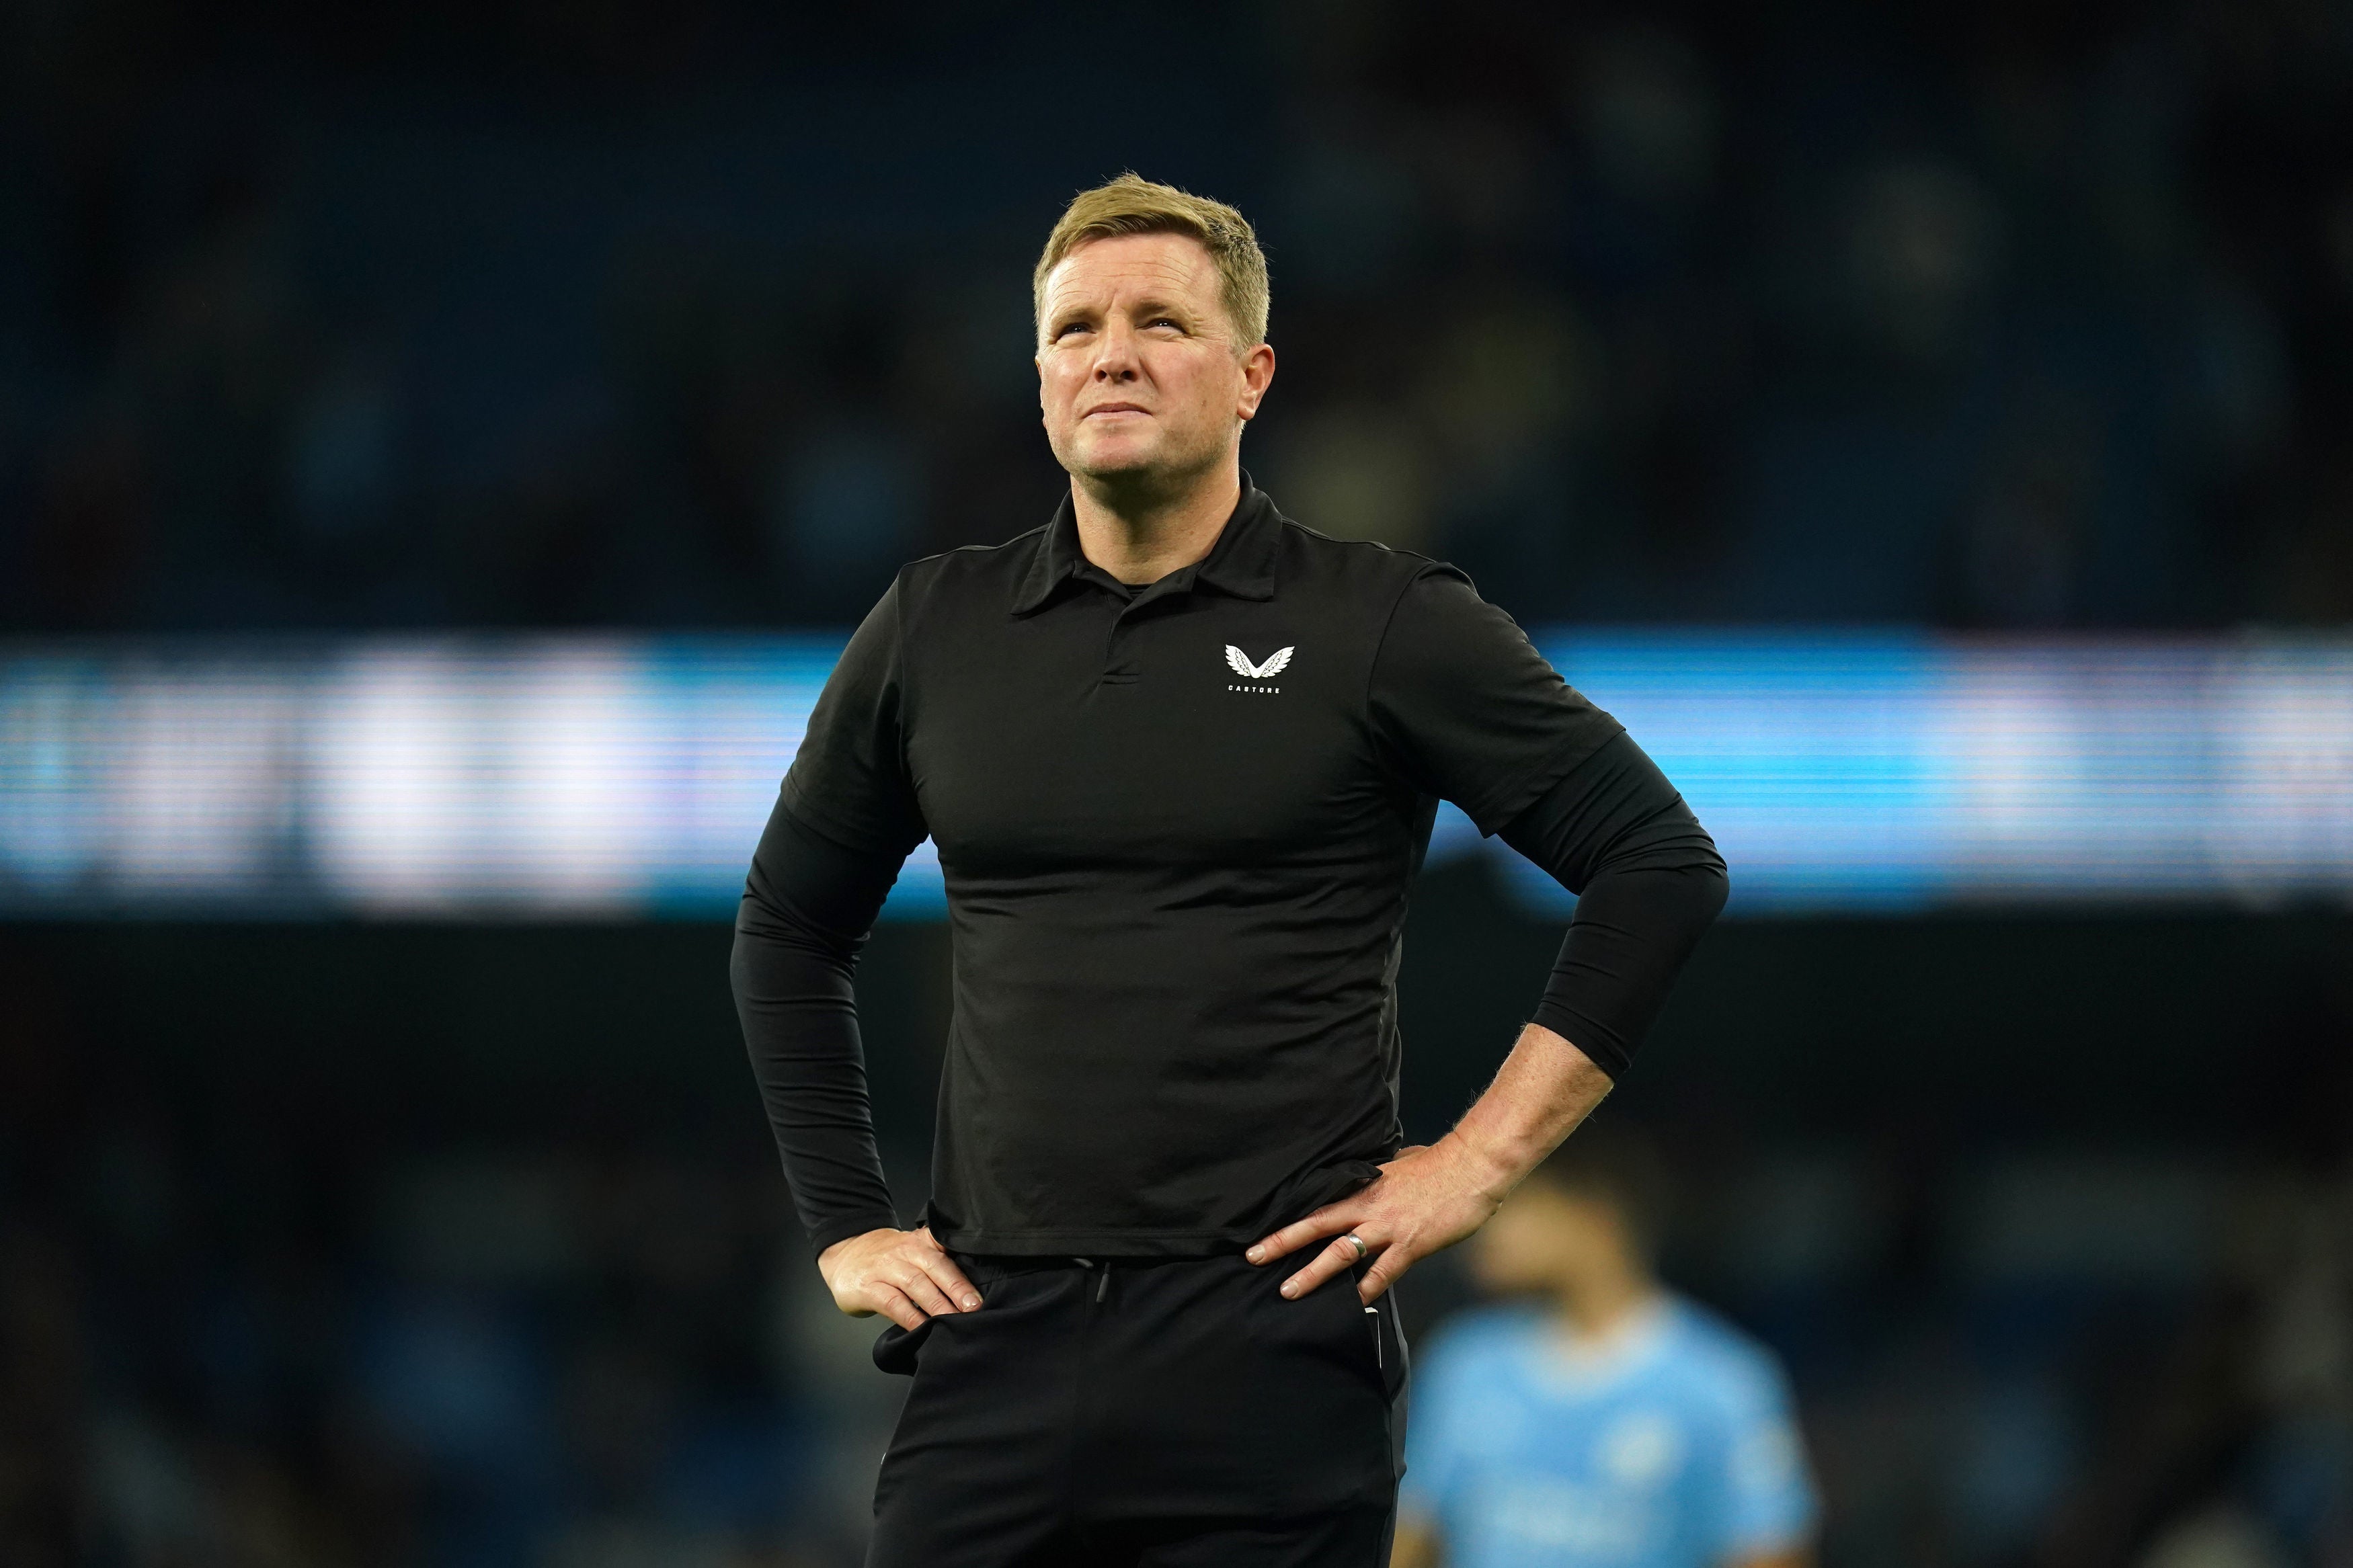 Eddie Howe could not prevent defeats to Manchester City and Liverpool